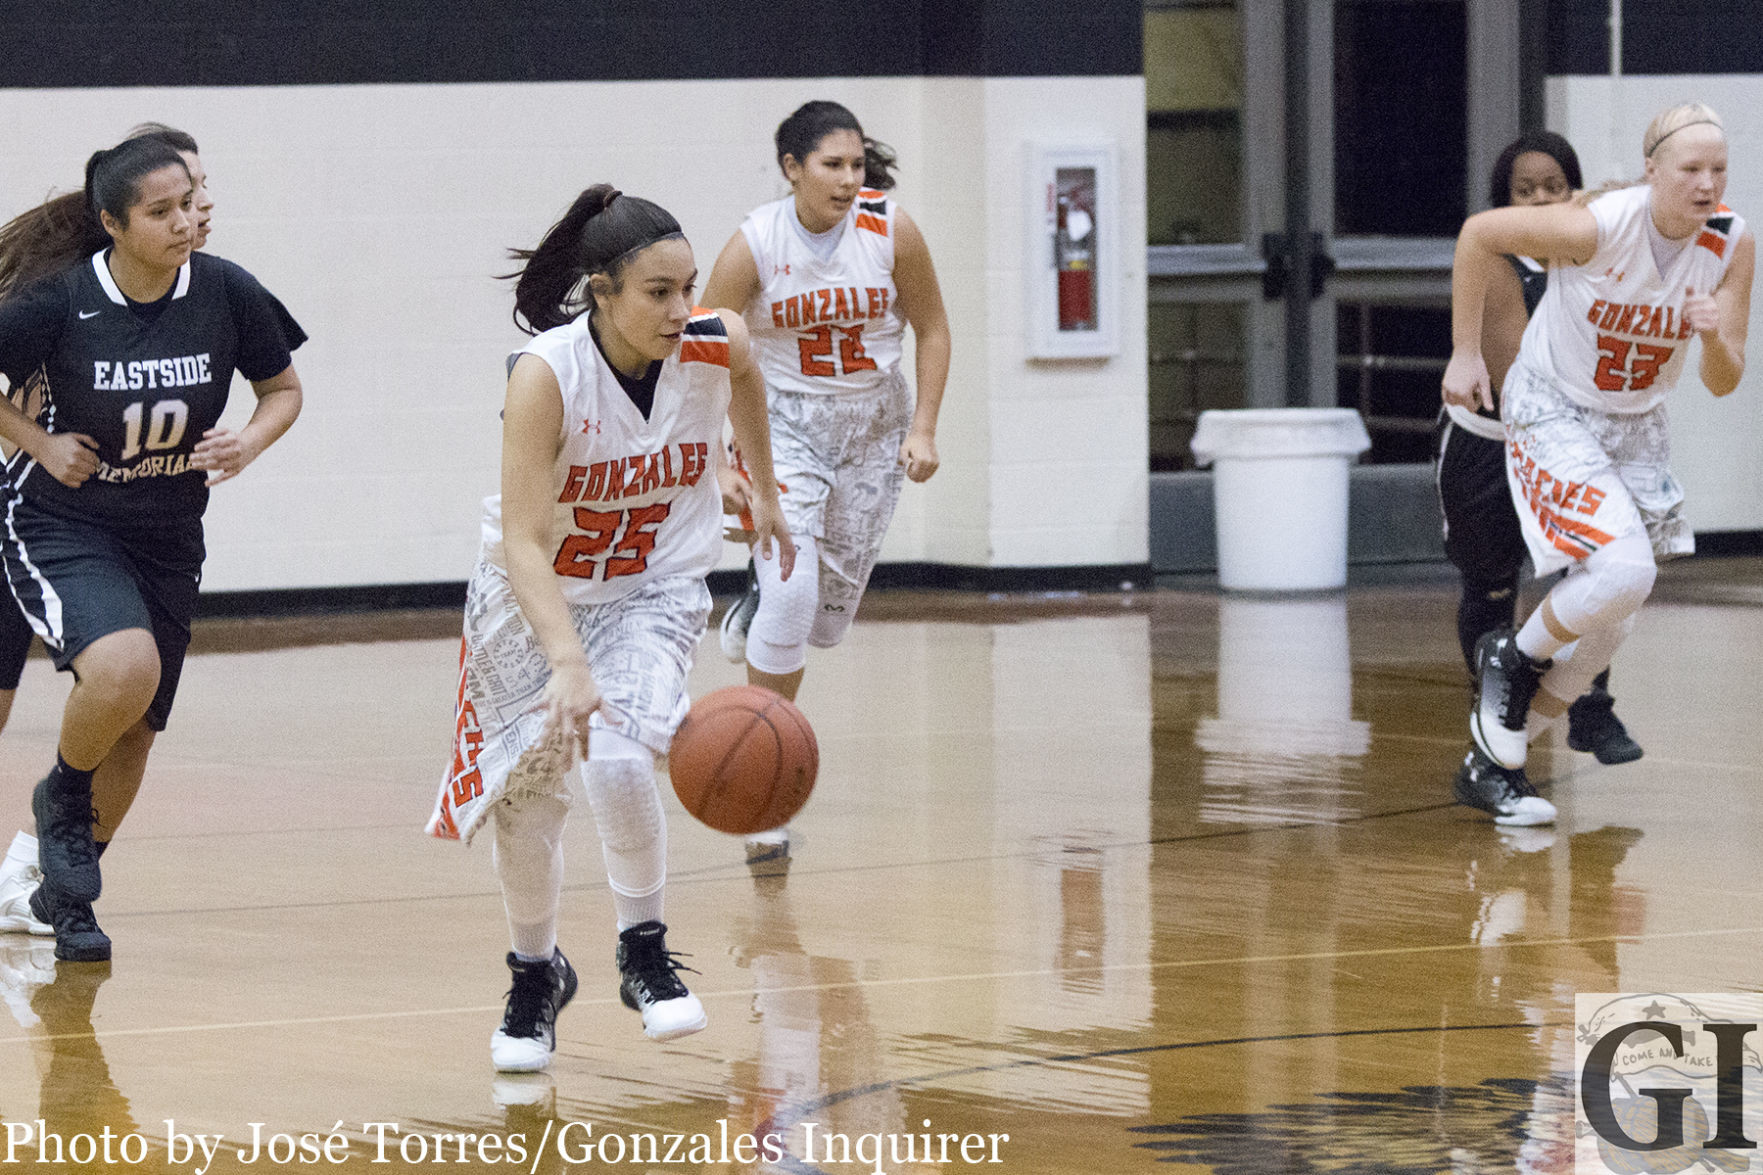 Freshman point guard Jiseala Longoria (25) drives down the court looking for a basket after a turnover. She finished the night with six points in Gonzales’ 70-35 win over Austin Eastside Memorial.